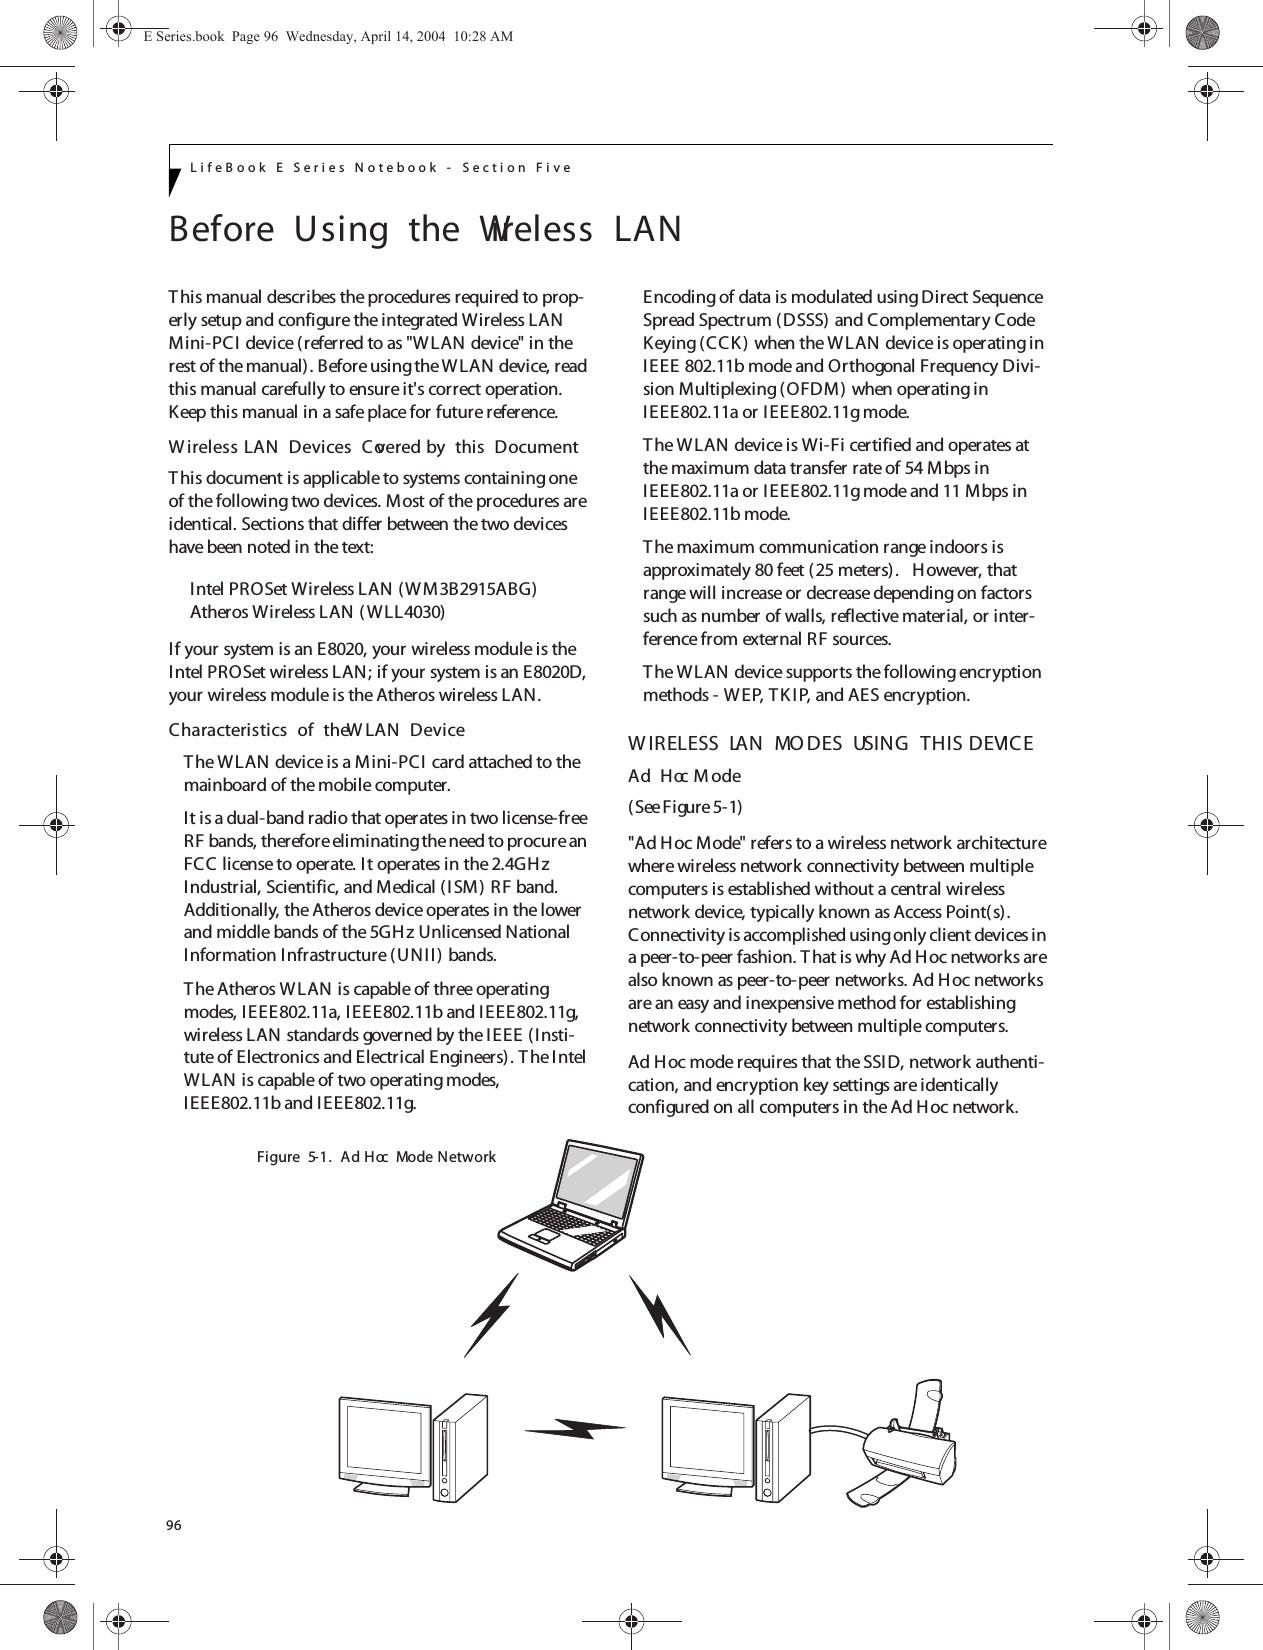 96LifeBook E Series Notebook - Section FiveBefore  Using  the  Wireless  LANThis manual describes the procedures required to prop-erly setup and configure the integrated Wireless LAN Mini-PCI device (referred to as &quot;WLAN device&quot; in the rest of the manual). Before using the W LAN device, read this manual carefully to ensure it&apos;s correct operation. Keep this manual in a safe place for future reference.W ireless LAN  Devices  Covered by  this  DocumentThis document is applicable to systems containing one of the following two devices. Most of the procedures are identical. Sections that differ between the two devices have been noted in the text:Intel PROSet Wireless LAN (WM3B2915ABG)Atheros Wireless LAN (WLL4030)If your system is an E8020, your wireless module is the Intel PROSet wireless LAN; if your system is an E8020D, your wireless module is the Atheros wireless LAN.Characteristics  of  the W LAN  DeviceThe WLAN device is a Mini-PCI card attached to the mainboard of the mobile computer. It is a dual-band radio that operates in two license-free RF bands, therefore eliminating the need to procure an FCC license to operate. It operates in the 2.4GH z Industrial, Scientific, and Medical (I SM) RF band. Additionally, the Atheros device operates in the lower and middle bands of the 5GH z Unlicensed National Information Infrastructure (UNII) bands. The Atheros WLAN is capable of three operating modes, IEEE802.11a, IEEE802.11b and IEEE802.11g, wireless LAN standards governed by the IEEE (Insti-tute of Electronics and Electrical Engineers). T he Intel WLAN is capable of two operating modes, IEEE802.11b and IEEE802.11g.Encoding of data is modulated using Direct Sequence Spread Spectrum (DSSS) and Complementary Code Keying (CCK ) when the WLAN device is operating in IEEE 802.11b mode and Orthogonal Frequency Divi-sion Multiplexing (OFDM) when operating in IEEE802.11a or I EEE802.11g mode. The W LAN device is Wi-Fi certified and operates at the maximum data transfer rate of 54 Mbps in IEEE802.11a or IEEE802.11g mode and 11 Mbps in IEEE802.11b mode.The maximum communication range indoors is approximately 80 feet (25 meters).   However, that range will increase or decrease depending on factors such as number of walls, reflective material, or inter-ference from external RF sources.The WLAN device supports the following encryption methods - WEP, TK I P, and AES encryption.W IRELESS  LAN  MO DES  USING  THIS  DEVICEAd  Hoc M ode (See Figure 5-1)&quot;Ad H oc Mode&quot; refers to a wireless network architecture where wireless network connectivity between multiple computers is established without a central wireless network device, typically known as Access Point(s). Connectivity is accomplished using only client devices in a peer-to-peer fashion. T hat is why Ad Hoc networks are also known as peer-to-peer networks. Ad Hoc networks are an easy and inexpensive method for establishing network connectivity between multiple computers.Ad Hoc mode requires that the SSID, network authenti-cation, and encryption key settings are identically configured on all computers in the Ad Hoc network. Figure  5-1.  Ad  Hoc  Mode NetworkE Series.book  Page 96  Wednesday, April 14, 2004  10:28 AM